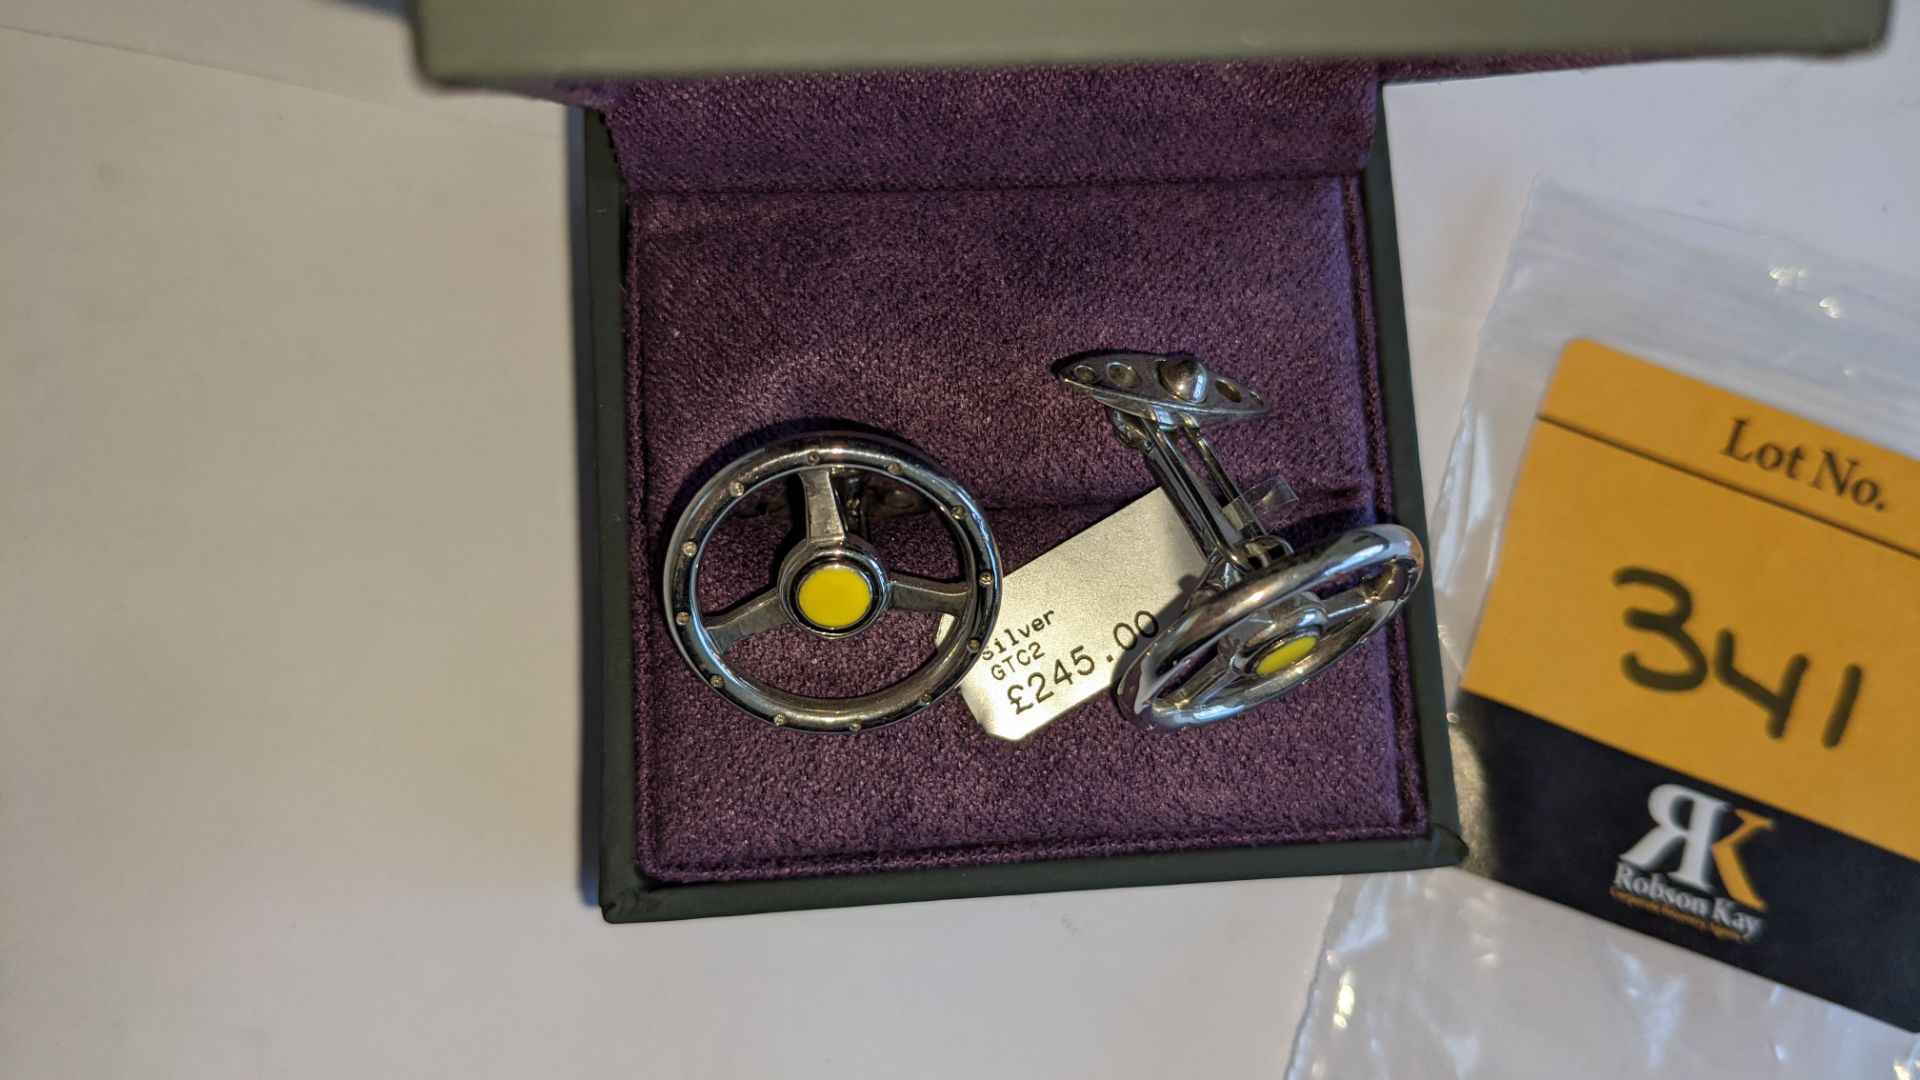 GTO London silver Volante cufflinks. RRP £245. Product code GTC2. NB. An internet search suggests G - Image 7 of 9